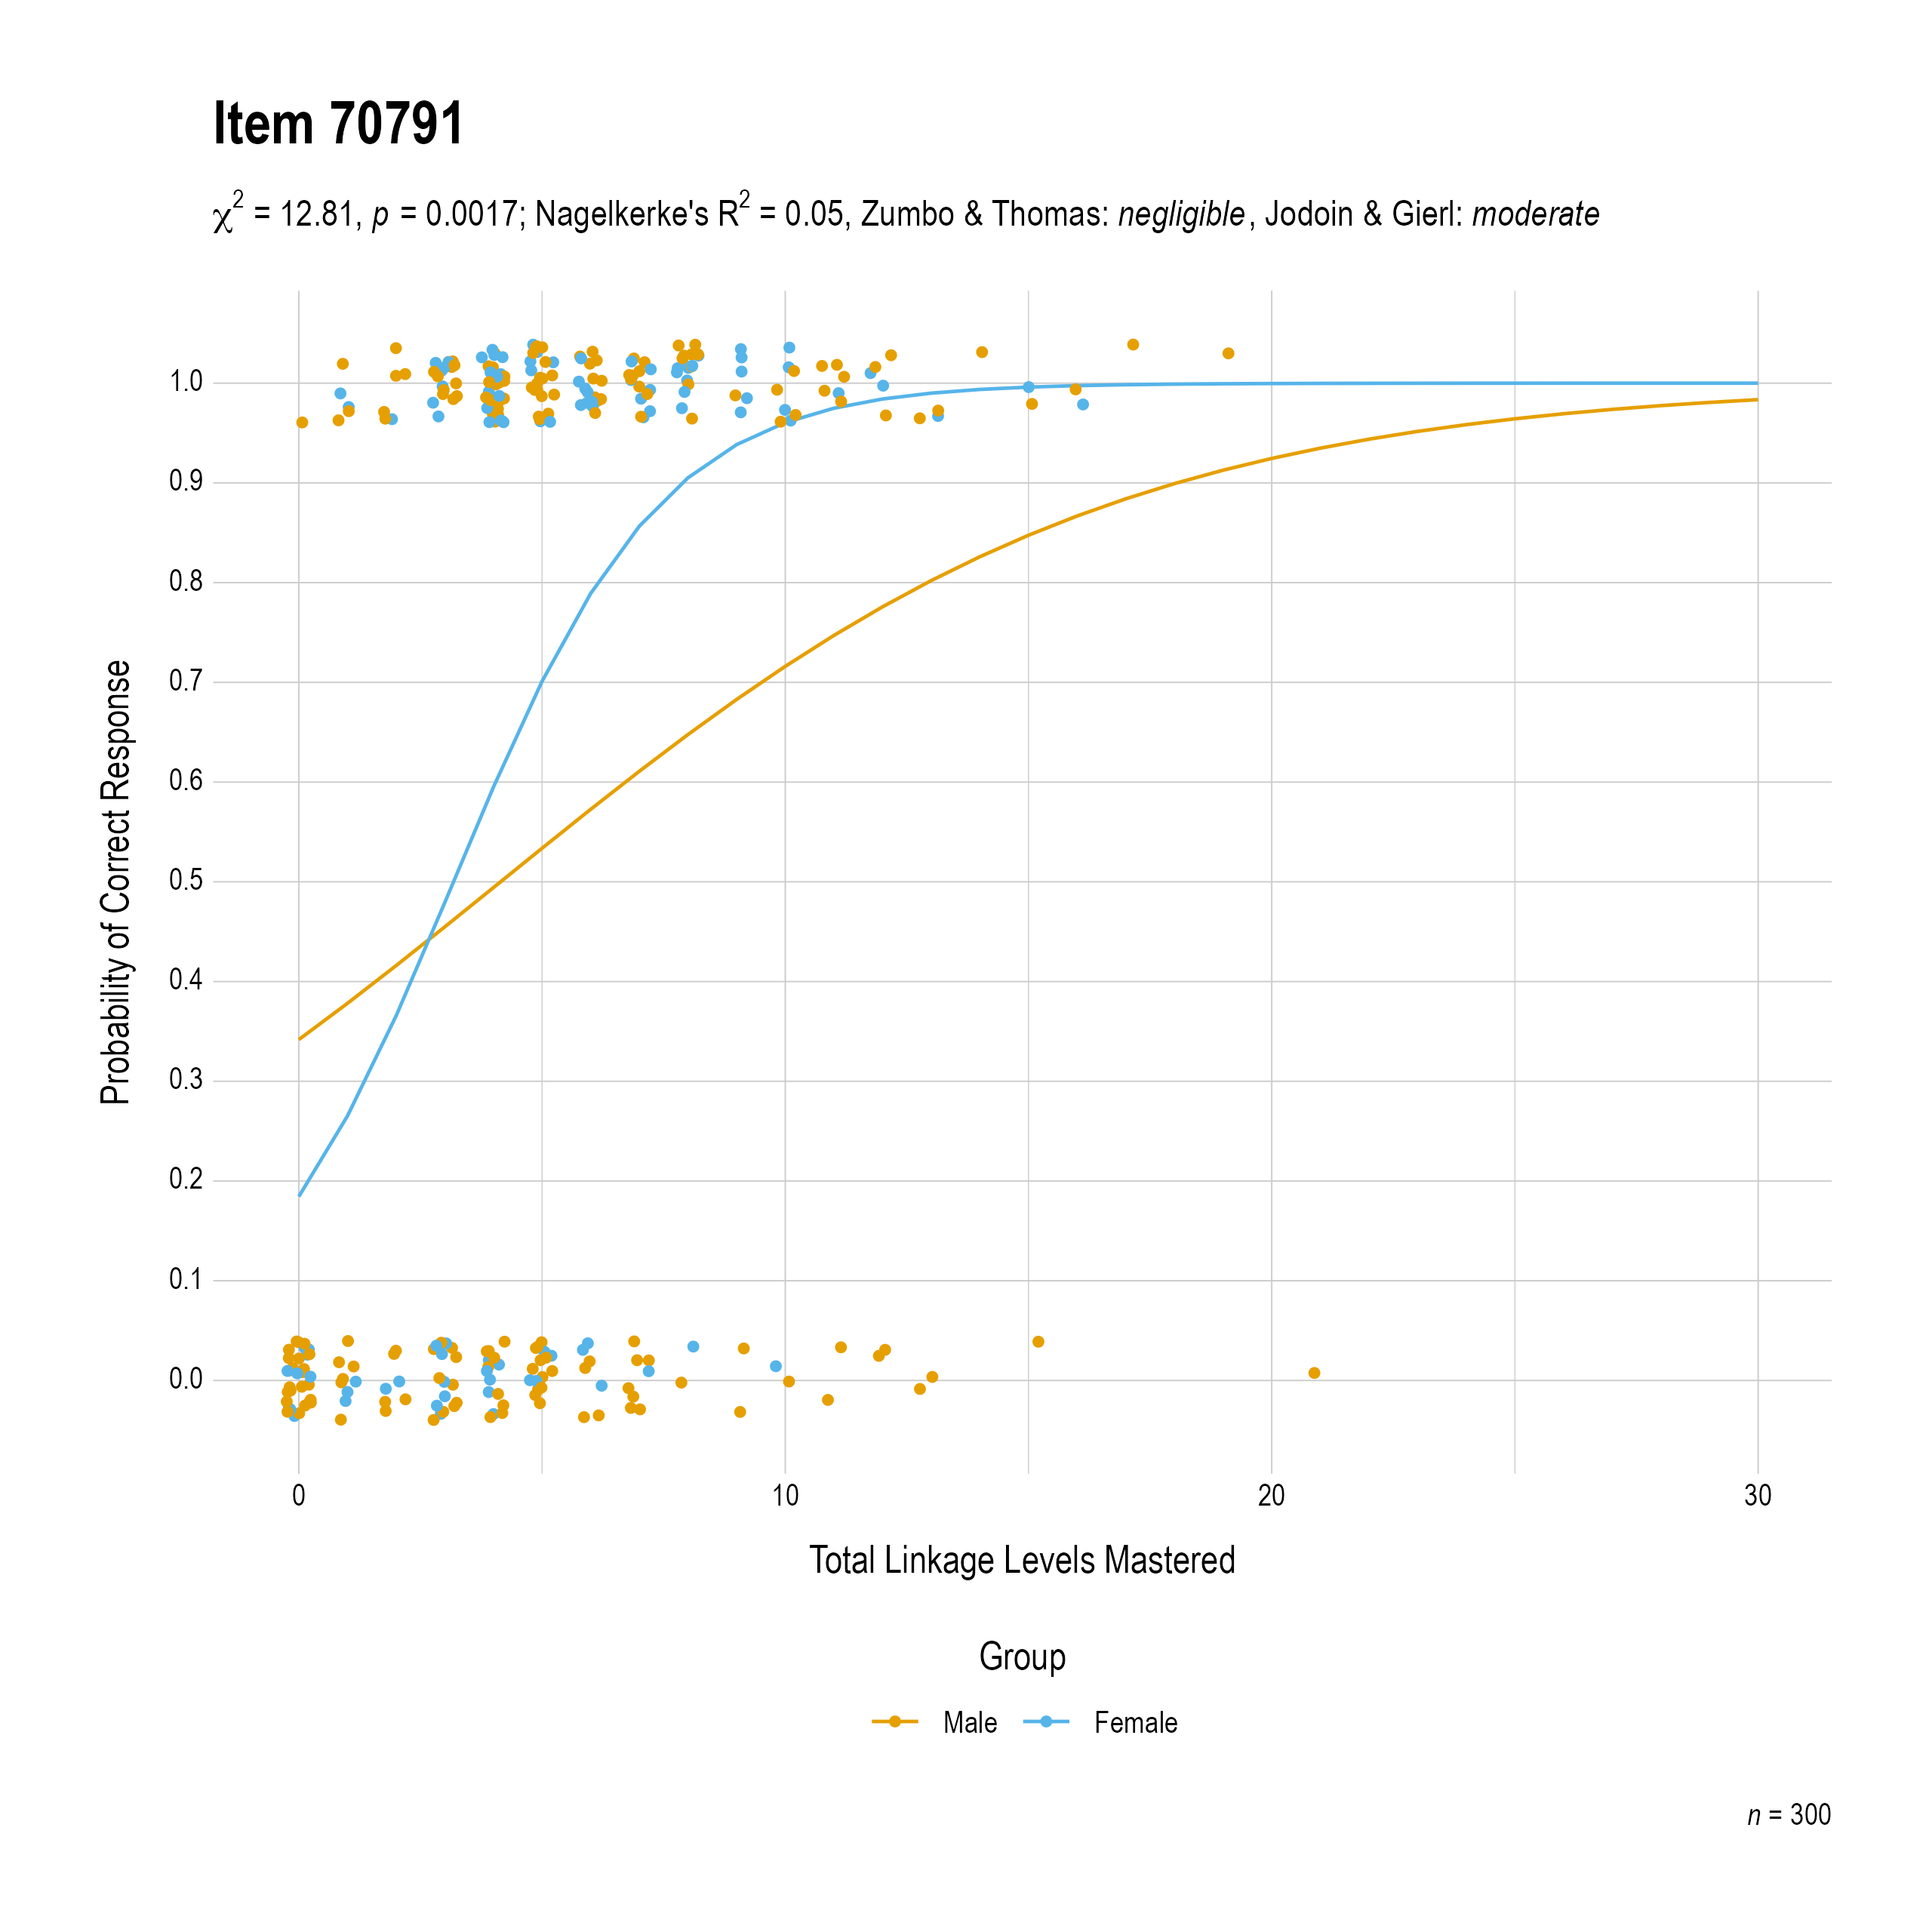 The plot of the combined gender differential item function evidence for Science item 70791. The figure contains points shaded by group. The figure also contains a logistic regression curve for each group. The total linkage levels mastered in is on the x-axis, and the probability of a correct response is on the y-axis.